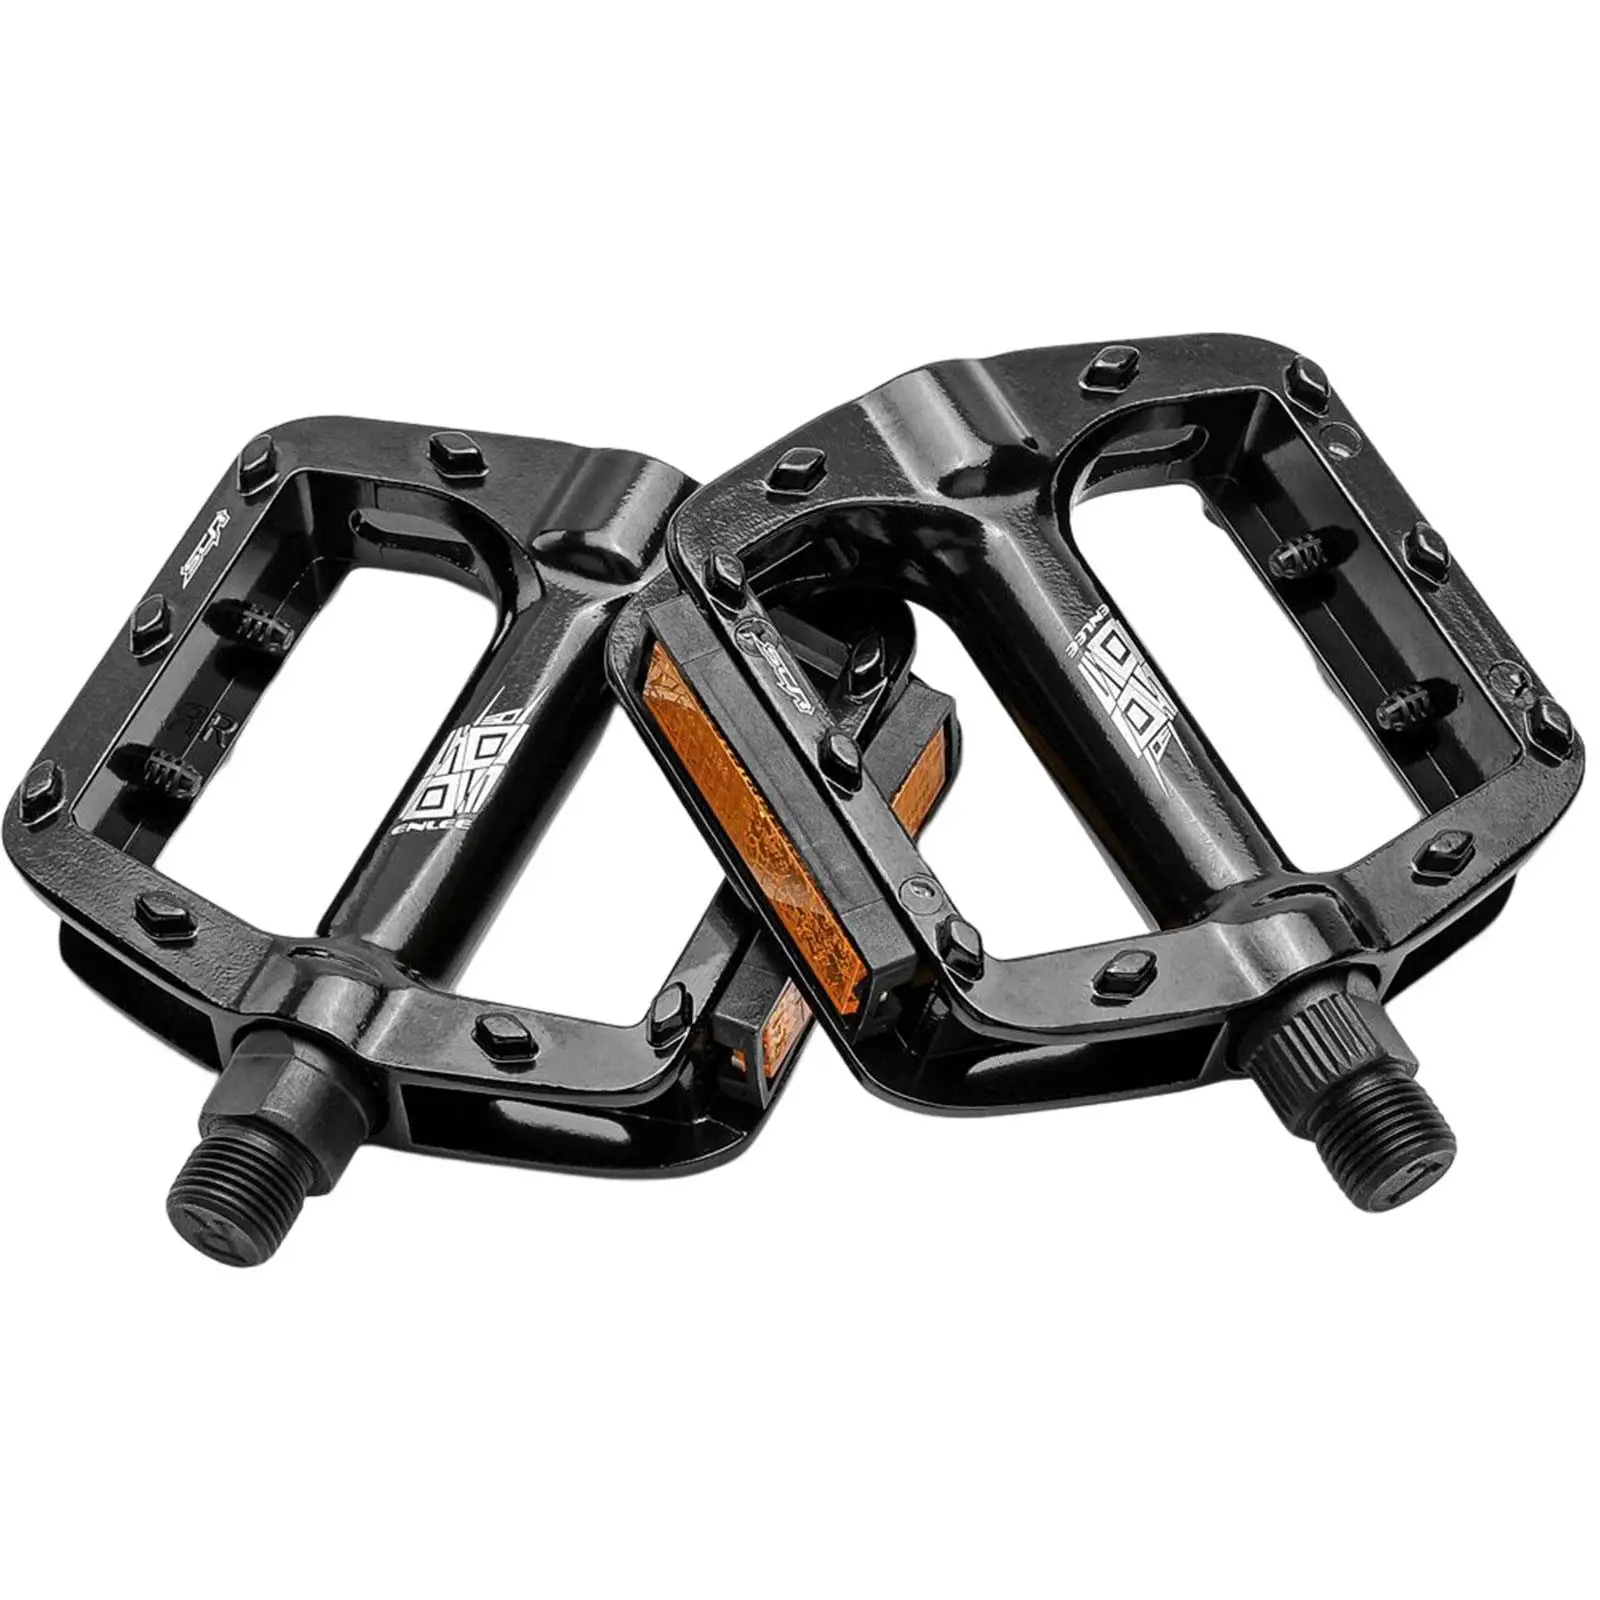 Aluminum Alloy Bike Pedals Sturdy Platform Bicycle Pedal for Biking Cycling